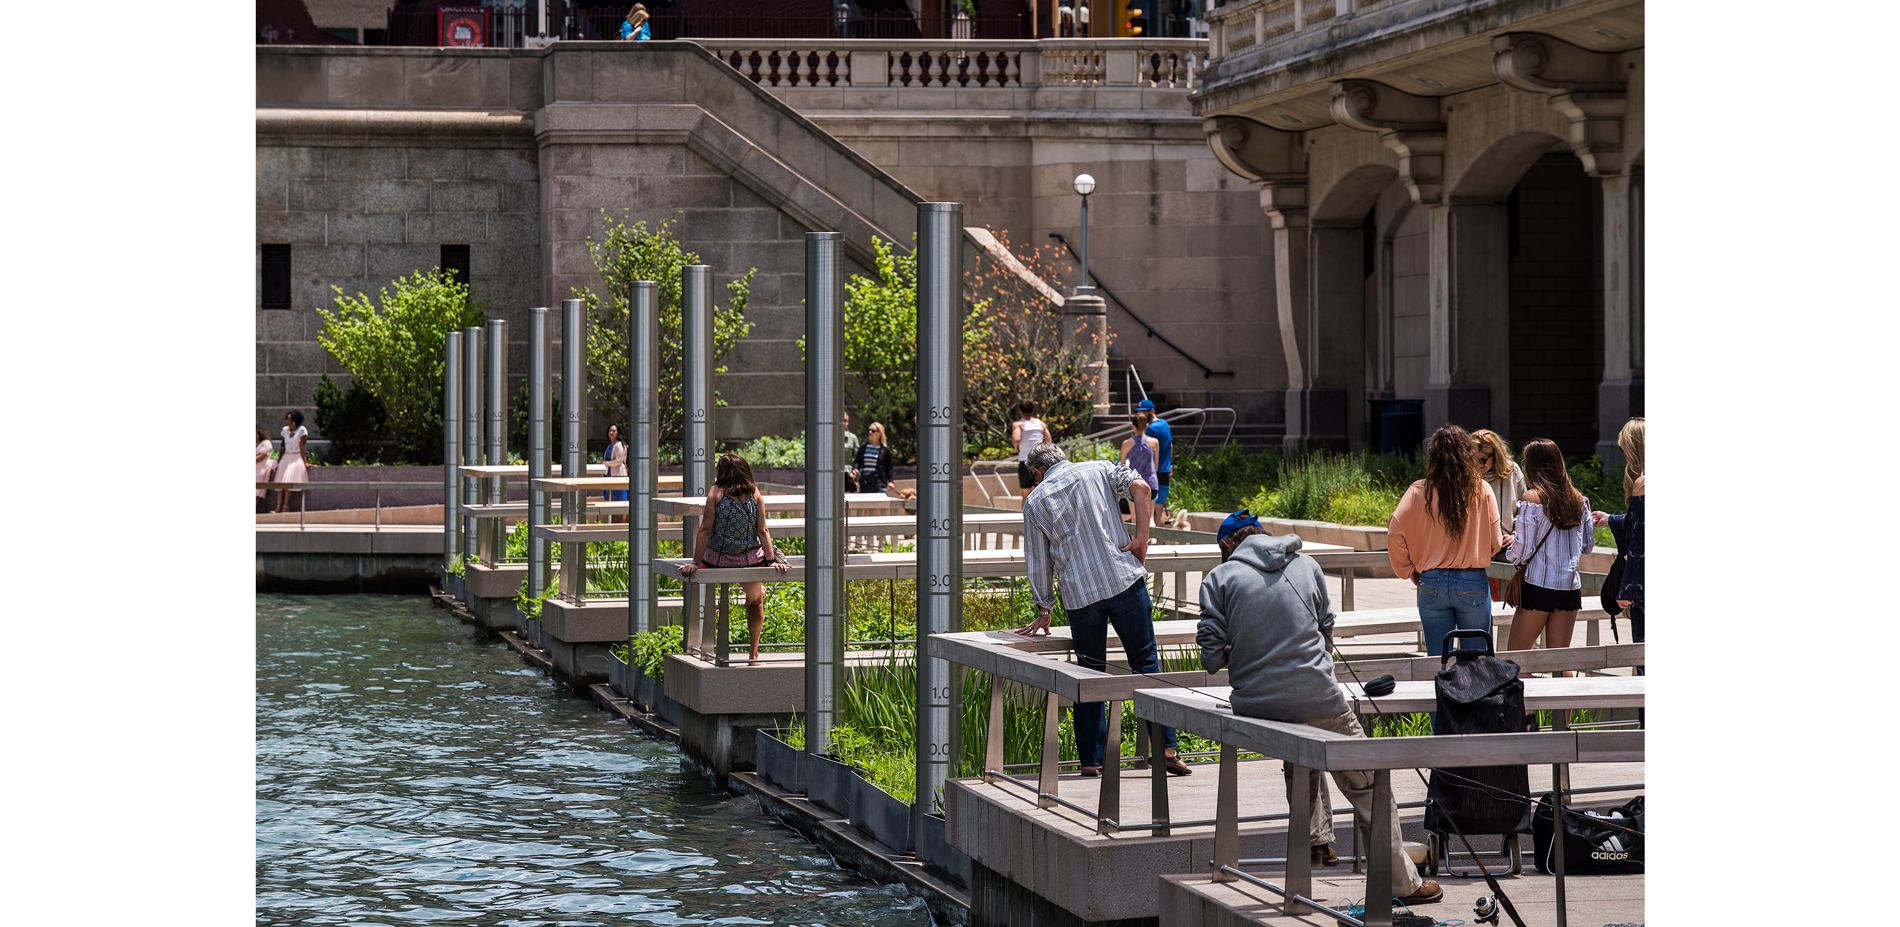 The Jetty’s floating wetlands provide a healthy habitat for the Chicago River’s diverse native fish population, as well as educational and recreationa…